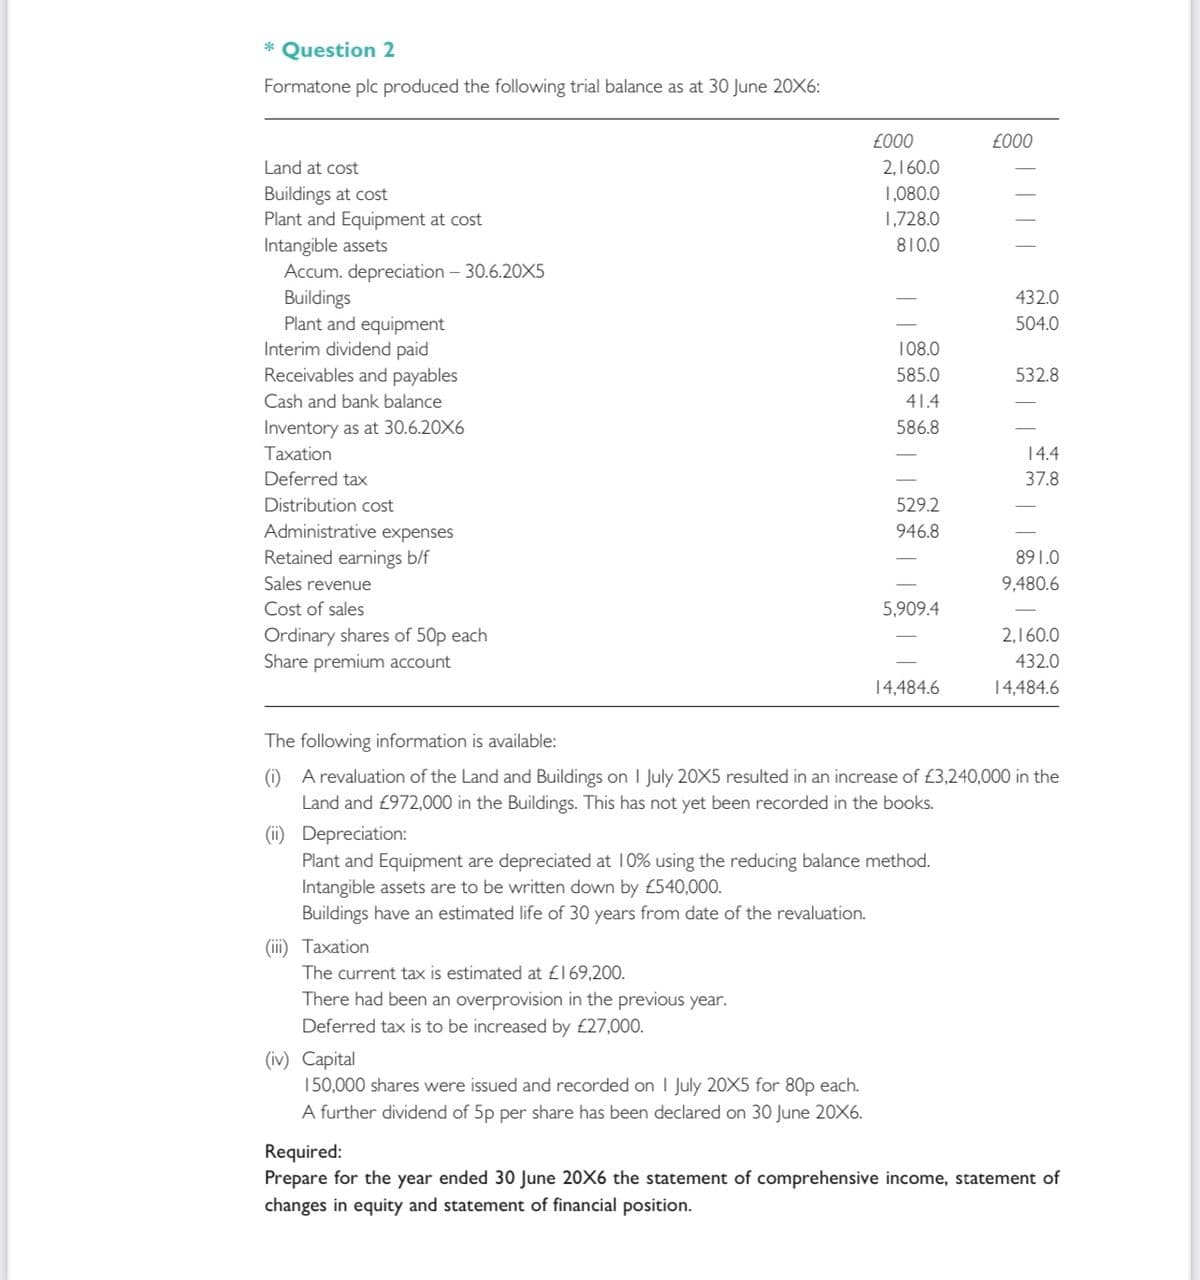 * Question 2
Formatone plc produced the following trial balance as at 30 June 20X6:
£000
£000
Land at cost
2,160.0
Buildings at cost
Plant and Equipment at cost
Intangible assets
Accum. depreciation – 30.6.20X5
Buildings
Plant and equipment
Interim dividend paid
Receivables and payables
1,080.0
1,728.0
810.0
432.0
504.0
108.0
585.0
532.8
Cash and bank balance
41.4
Inventory as at 30.6.20X6
586.8
Taxation
14.4
Deferred tax
37.8
Distribution cost
529.2
Administrative expenses
Retained earnings b/f
946.8
891.0
Sales revenue
9,480.6
Cost of sales
5,909.4
Ordinary shares of 50p each
Share premium account
2,160.0
432.0
14,484.6
14,484.6
The following information is available:
(i) A revaluation of the Land and Buildings on I July 20X5 resulted in an increase of £3,240,0O00 in the
Land and £972,000 in the Buildings. This has not yet been recorded in the books.
(ii) Depreciation:
Plant and Equipment are depreciated at 10% using the reducing balance method.
Intangible assets are to be written down by £540,000.
Buildings have an estimated life of 30 years from date of the revaluation.
(iii) Taxation
The current tax is estimated at £169,200.
There had been an overprovision in the previous year.
Deferred tax is to be increased by £27,000.
(iv) Capital
150,000 shares were issued and recorded on I July 20X5 for 80p each.
A further dividend of 5p per share has been declared on 30 June 20X6.
Required:
Prepare for the year ended 30 June 20X6 the statement of comprehensive income, statement of
changes in equity and statement of financial position.
||||
